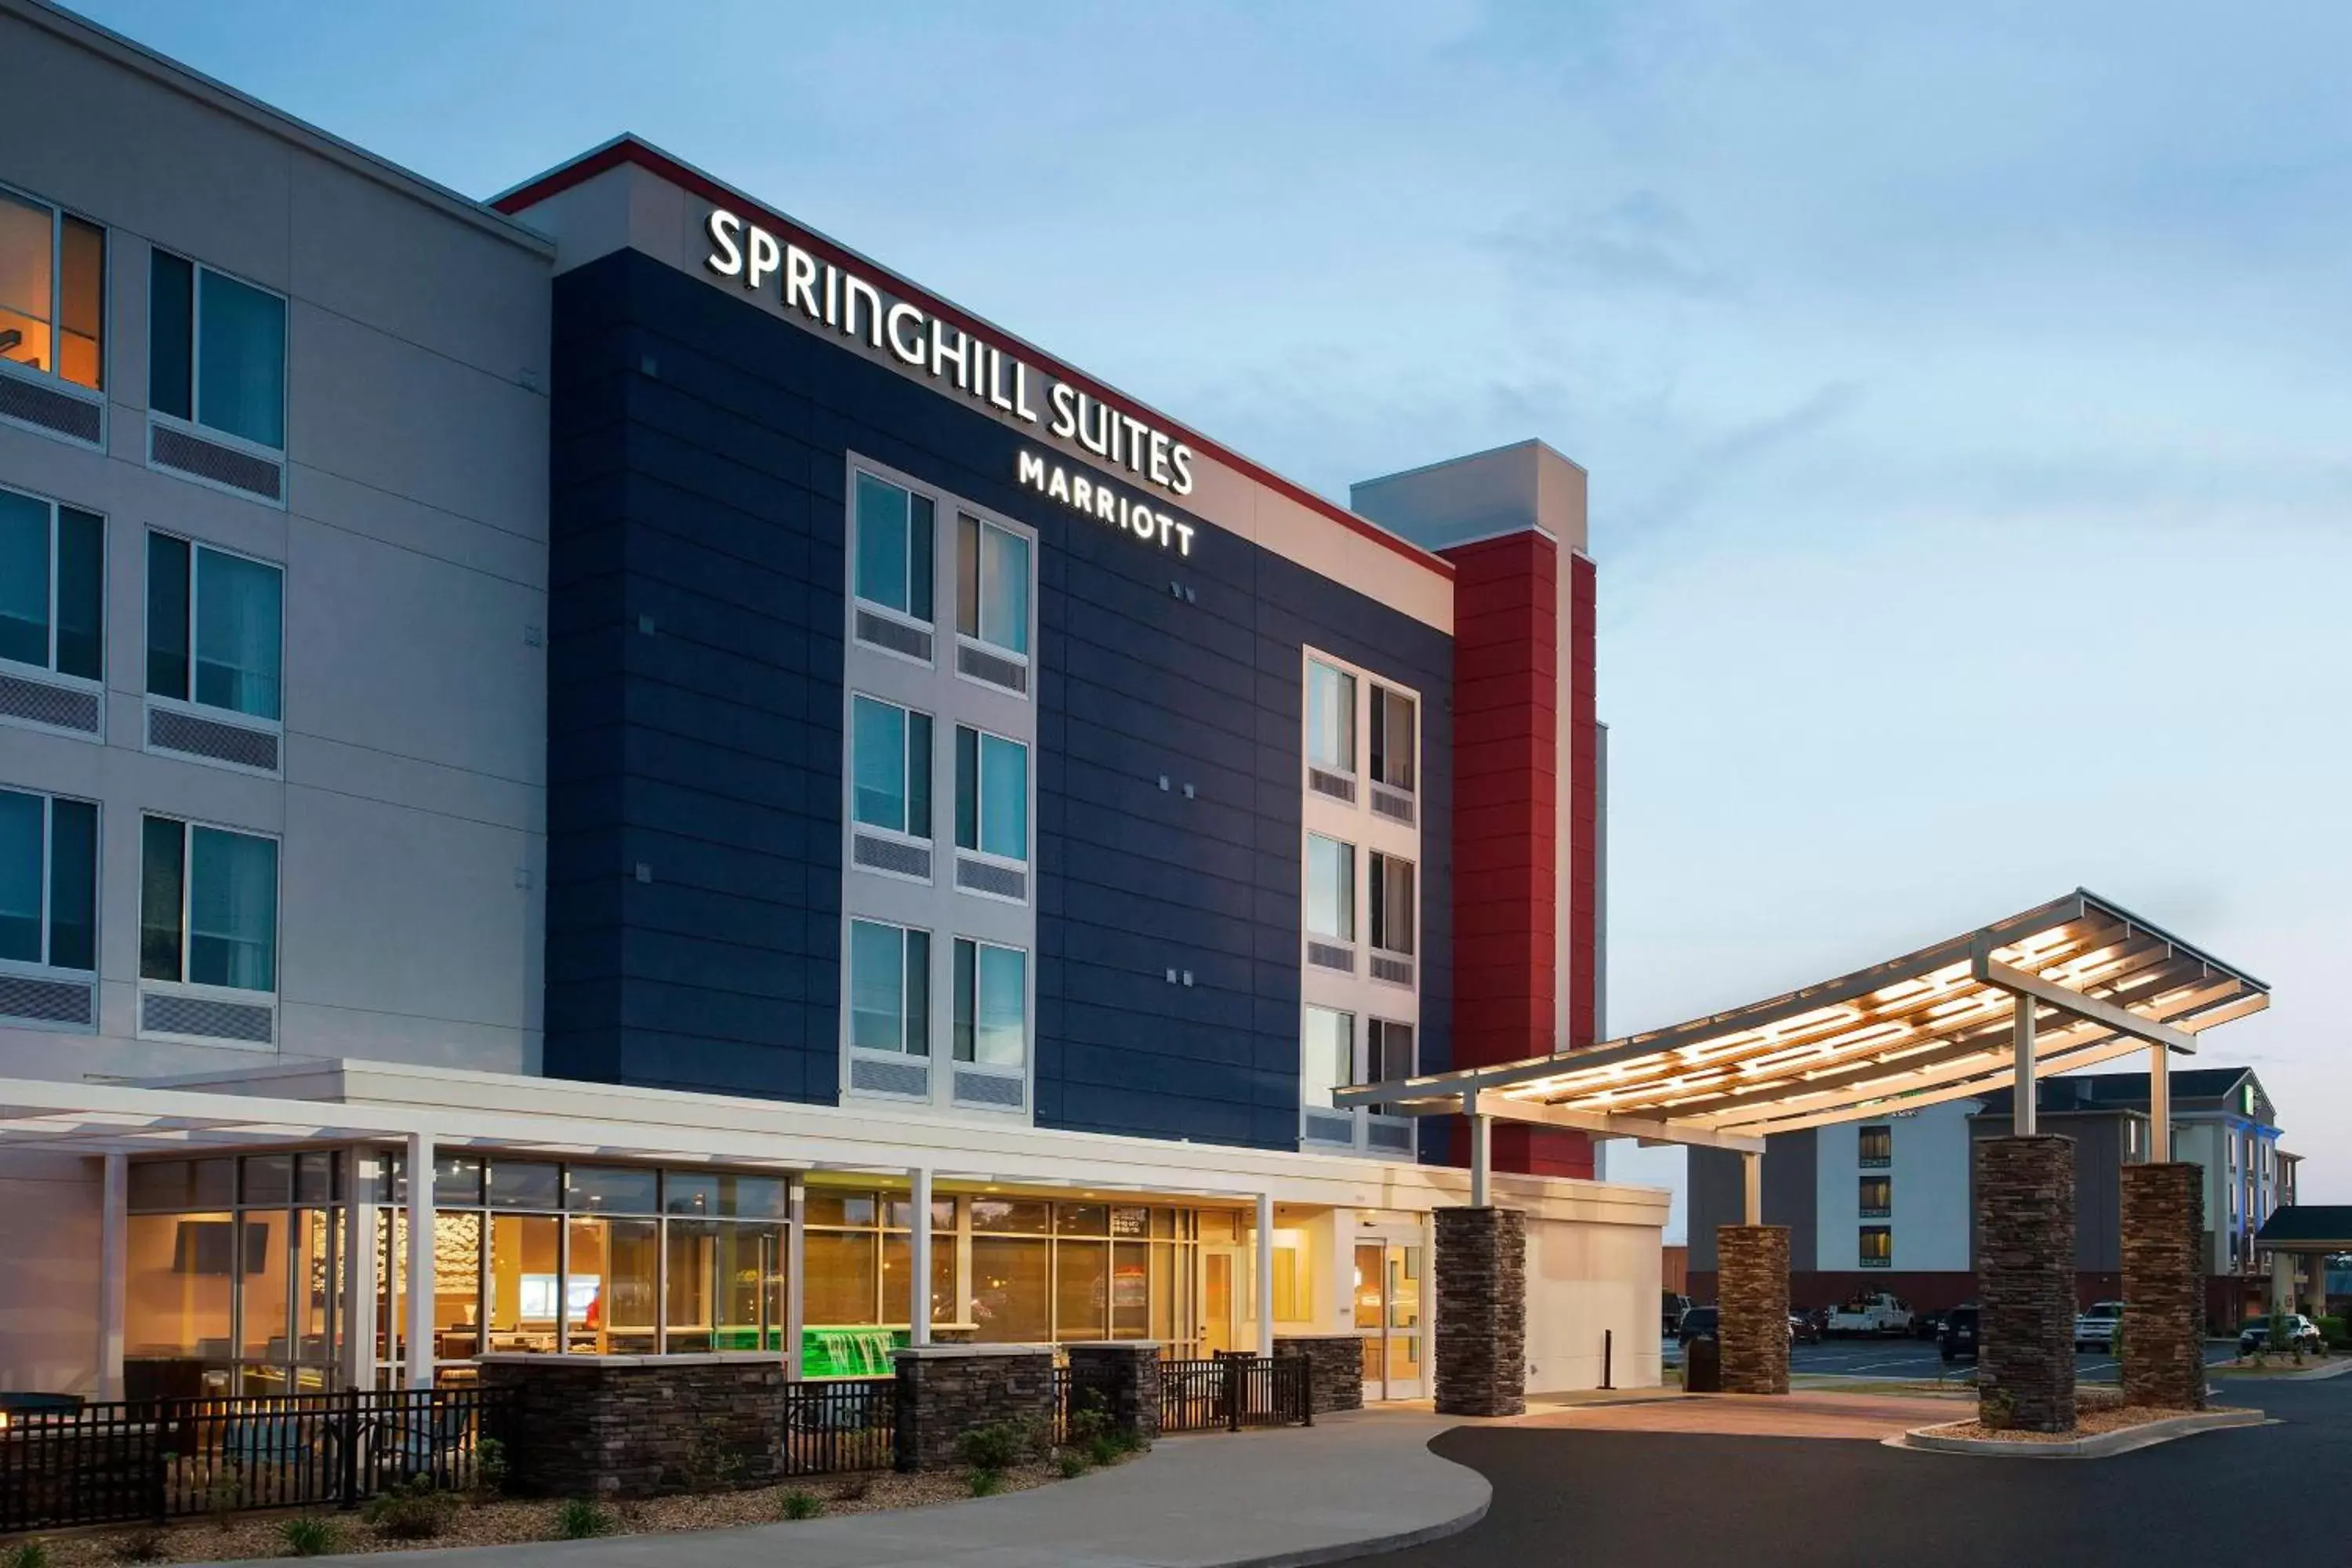 Property Building in SpringHill Suites by Marriott Murray